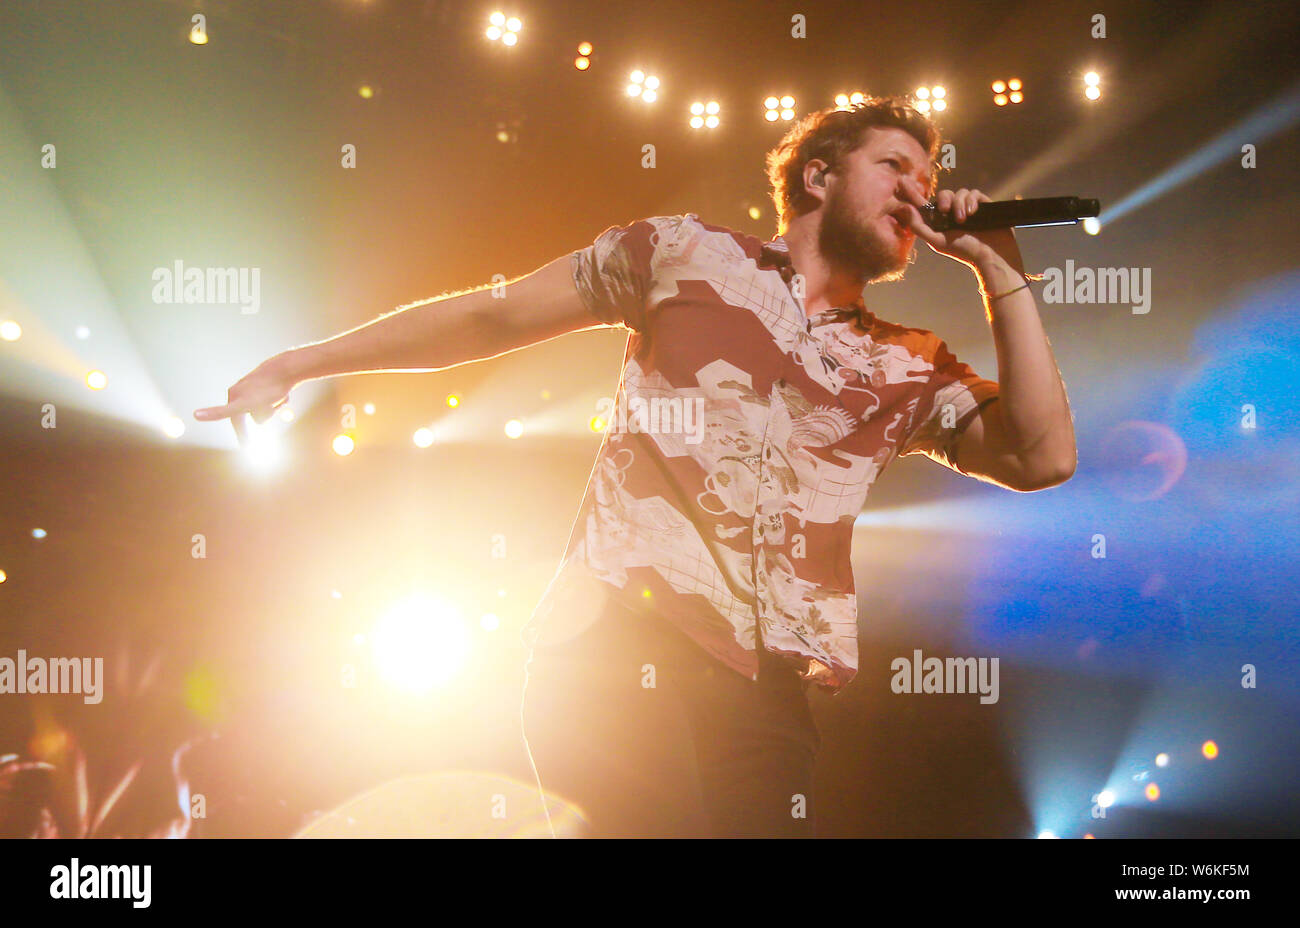 American singer-songwriter Daniel Coulter Reynolds (Dan Reynolds), the lead vocalist of American rock band Imagine Dragons, performs during the band's Stock Photo